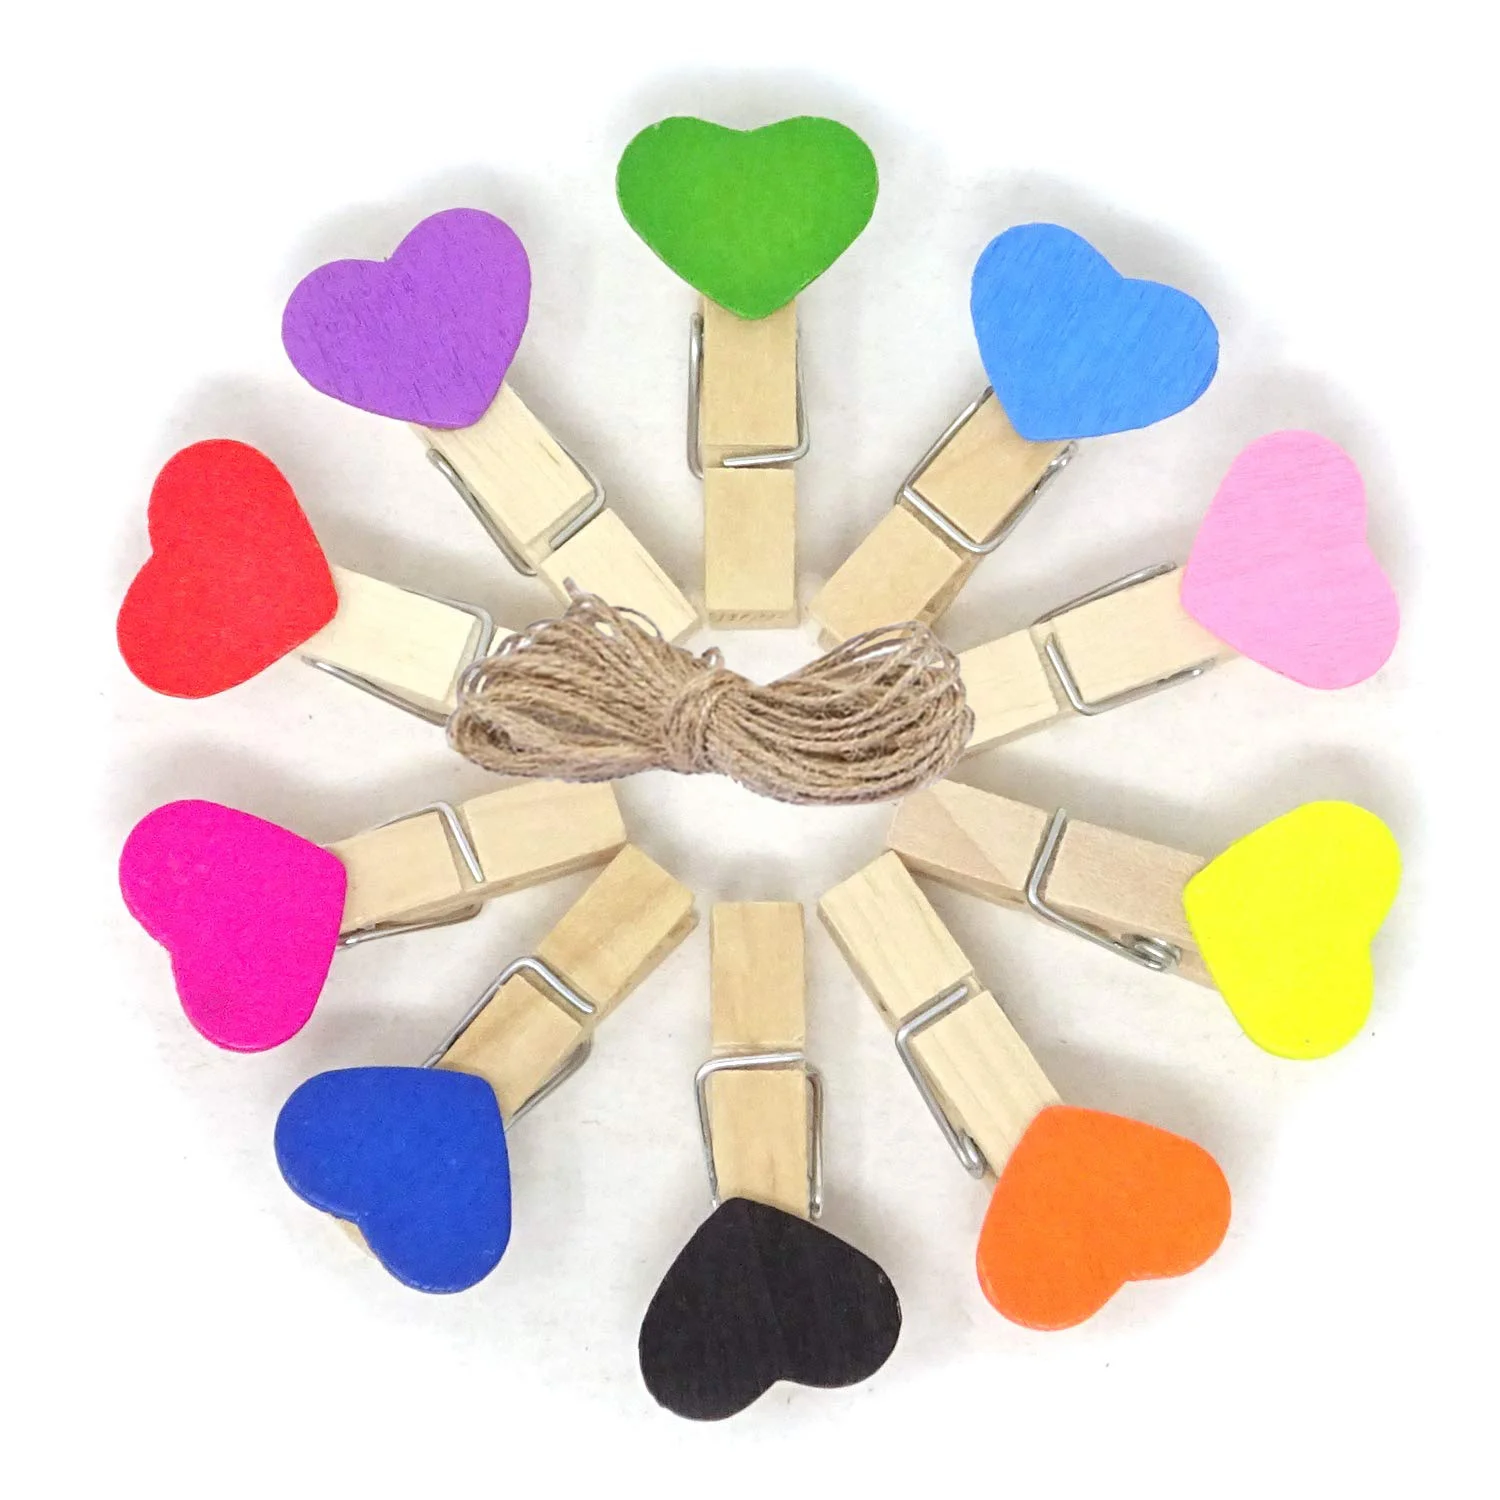 

50PCS 3.5cm Mini Heart Shaped Wooden Clothespin Colored Photos Craft Clips with 10m Jute Twine Wedding Birthday Party Decoration